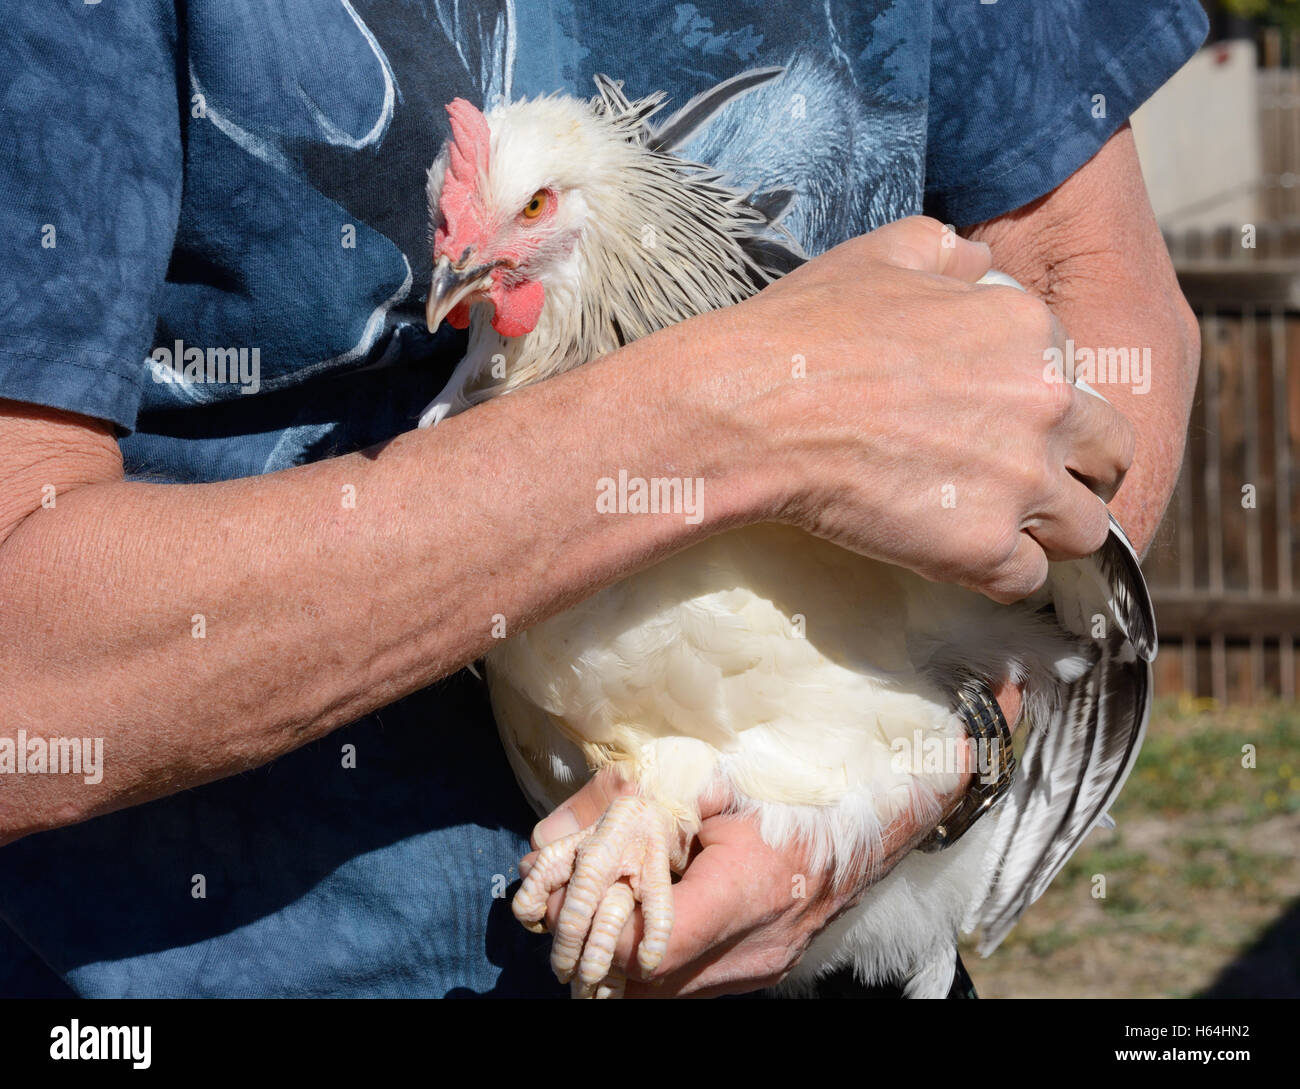 Hands ad arms holding light Sussex rooster Stock Photo